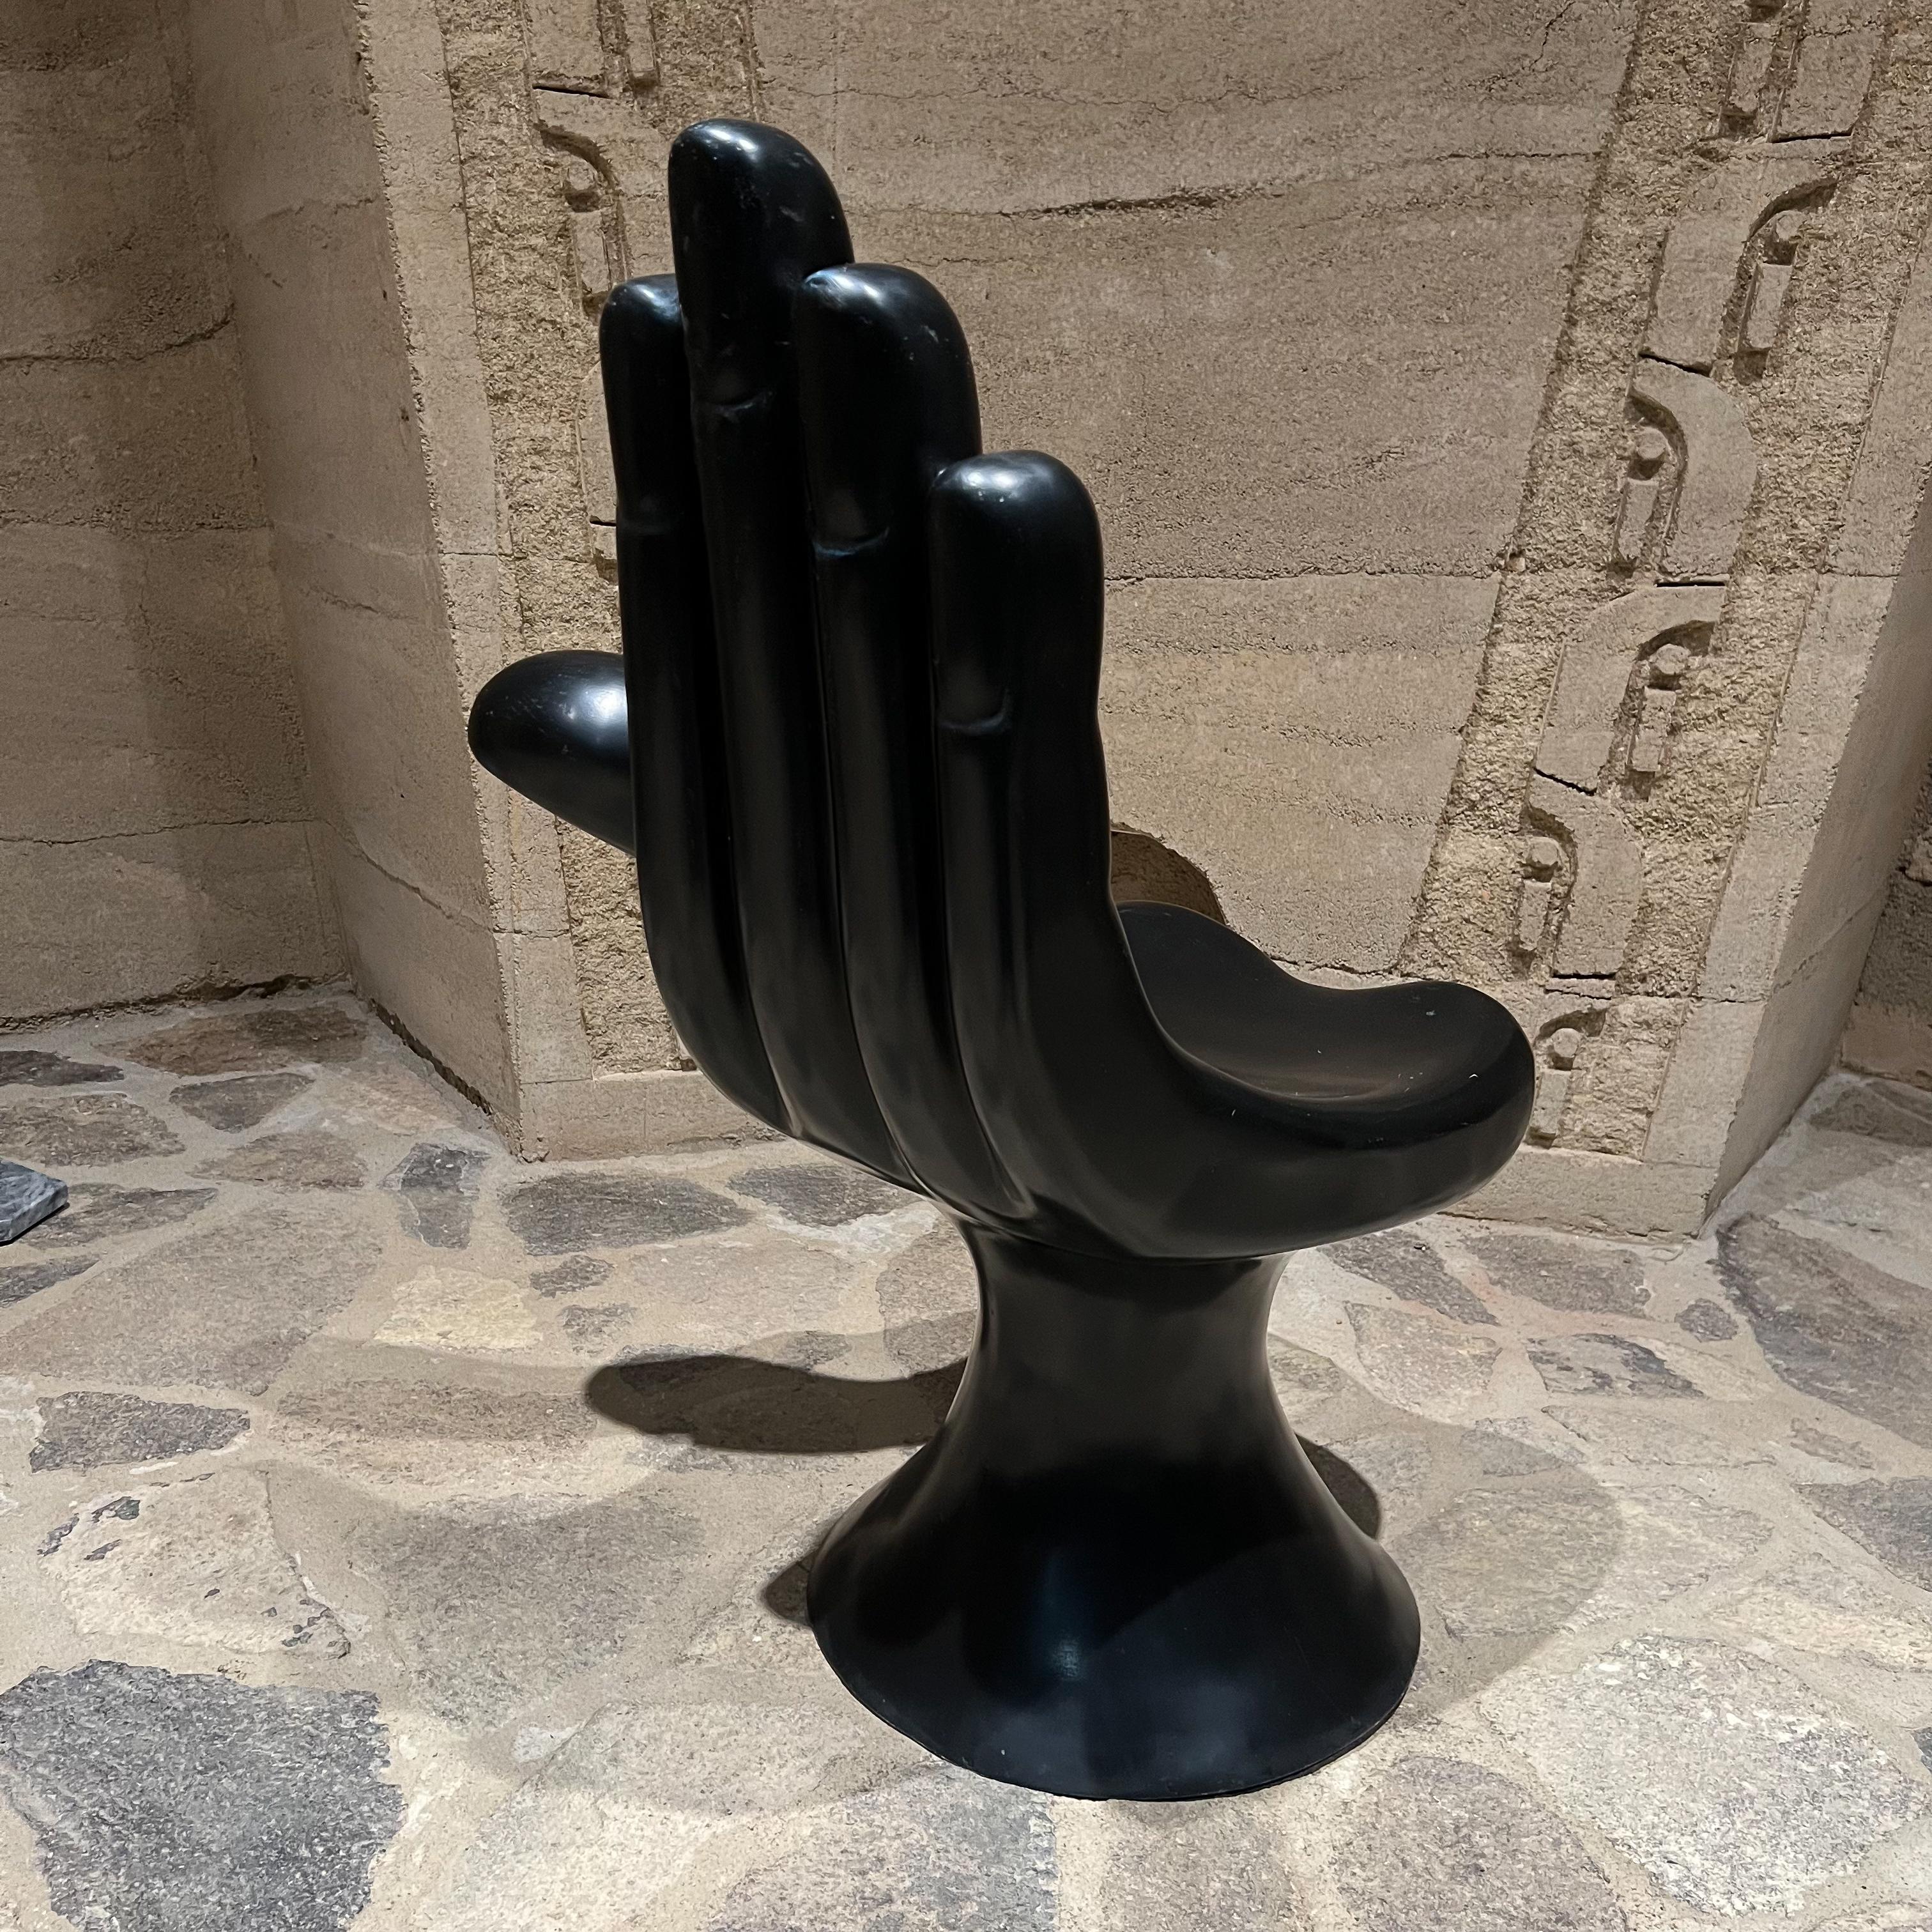 Fiberglass hand chair
Phenomenal black fiberglass hand chair design Pedro Friedeberg, Mexico
Unsigned. No COA available.
Measures: 36 tall x 24 width x 24 depth seat 17.25 tall
Preowned original unrestored vintage good condition.
Refer to